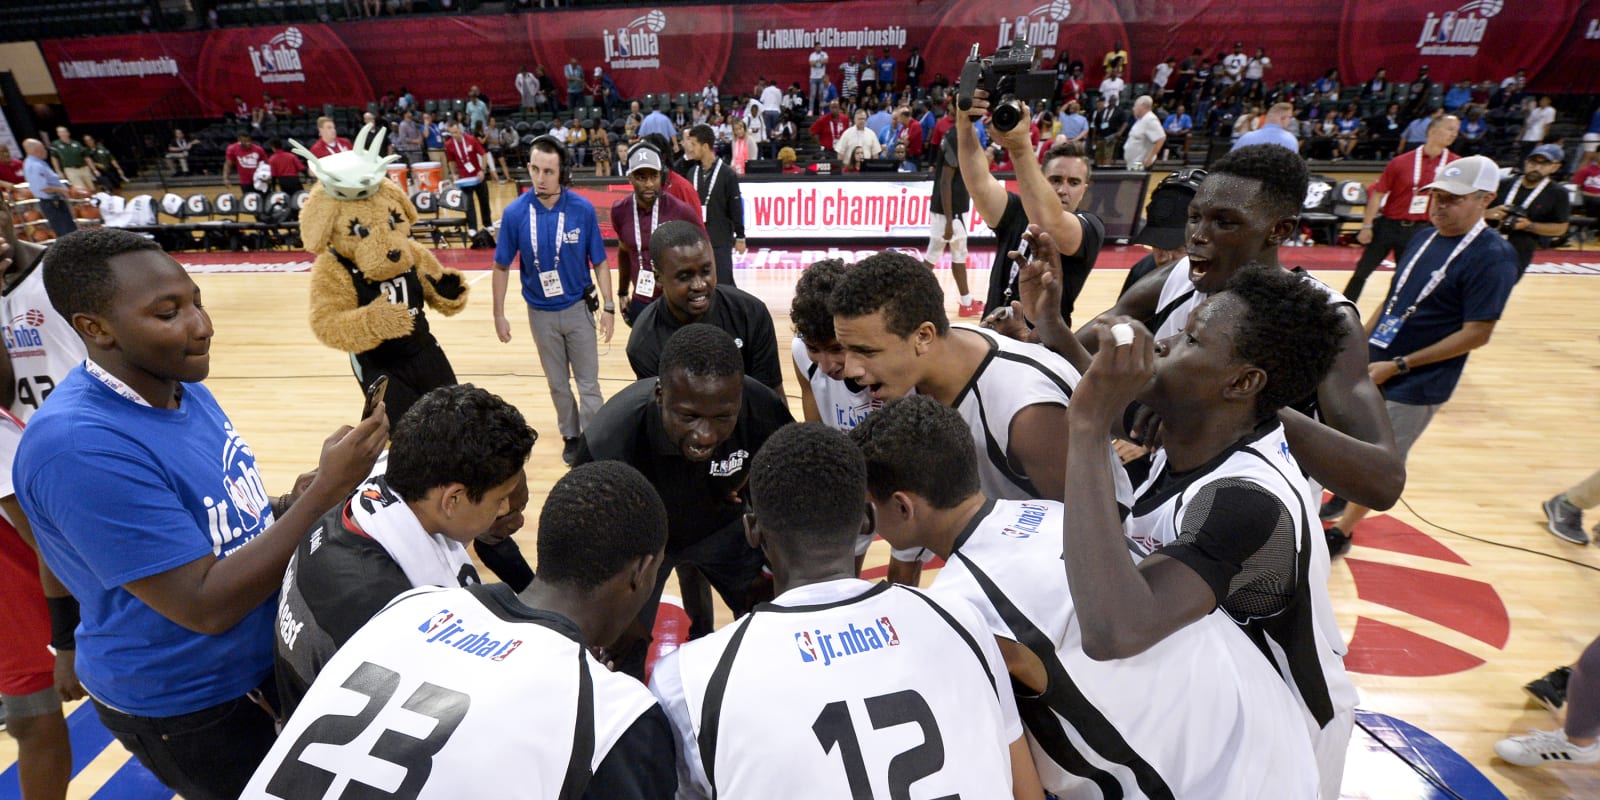 The Jr. NBA World Championship is an opportunity of a lifetime